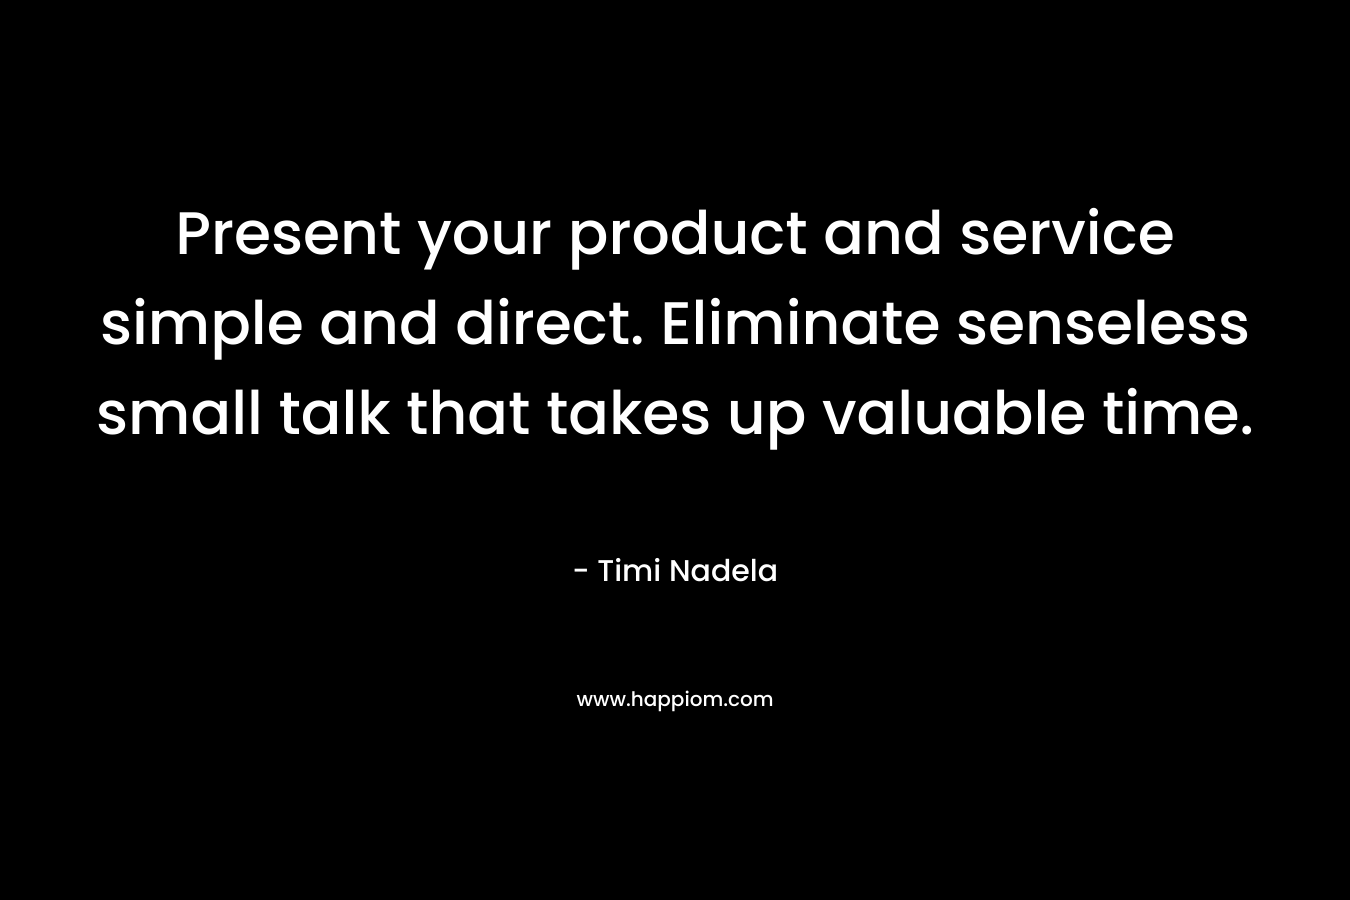 Present your product and service simple and direct. Eliminate senseless small talk that takes up valuable time.